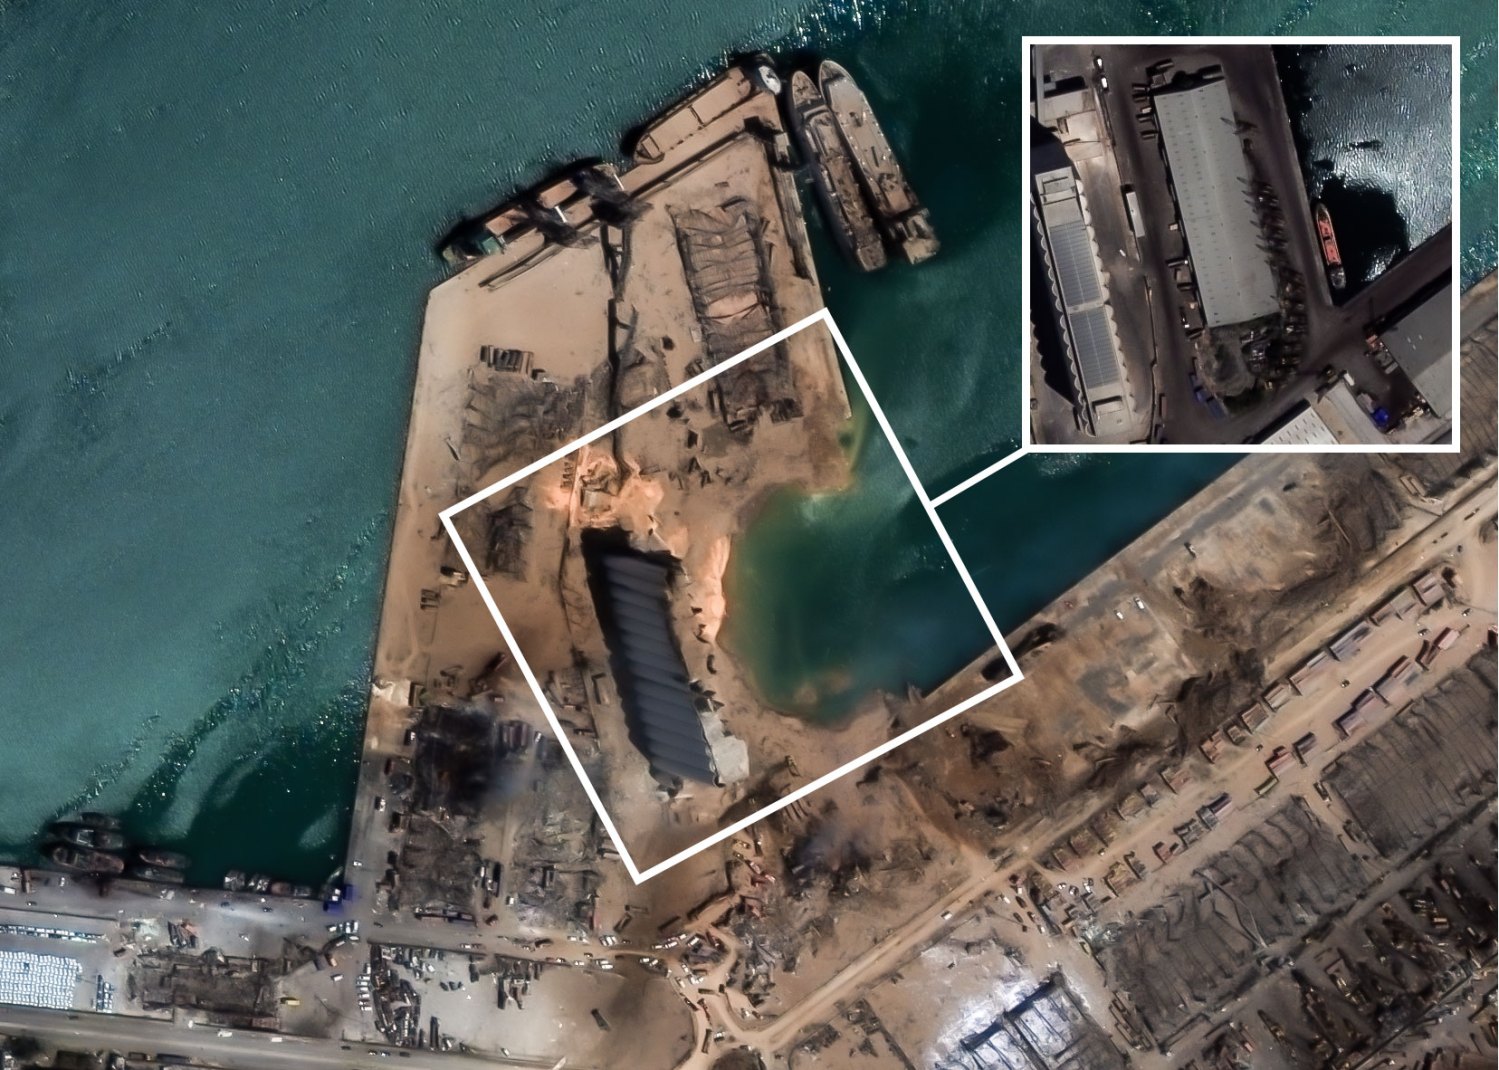 PICTURE SHOWS: Before and after the explosionThese satellite images show the extent of the devastation caused by the massive explosion at Beirut's port on Tuesday (4 August 2020).In one after photo the image shows a huge crater where a warehouse once stood.The images were captured the day after the explosion with WorldView-2 by European Space Imaging in order to assess the damage to the surrounding blast site.Almost 20 buildings have been completely destroyed, whilst hundreds of other surrounding buildings have been significantly damaged.A cruise ship has been overturned and four tankers have been damaged.According to AIS data, this cruise ship is the “Orient Queen” sailing under the flag of Bahamas, and originating from port King Abdullah, Saudi Arabia.It has been reported that the explosion at Beirut’s port resulted in the damage of 90% of the hotels in the Lebanese capital and that the blasts could be felt up to 200 km away in Cyprus.“When disaster strikes, VHR satellite imagery can provide critical information for emergency relief operations to evaluate the extent of damage and get an entire overview of the scene,” said Adrian Zevenbergen, Managing Director, European Space Imaging.“It supplies crisis management teams with logistical insights for planning and helps to monitor and detect any changes that may be critical to minimising or even eliminating further catastrophe.”The cause of the explosion is still unknown, however it has been reported that the blasts occurred in a section of the port that stores previously confiscated highly explosive substances.With the country already suffering a crippling economic crisis as a result of battling COVID-19, this explosion plummets the city into further catastrophe with the country’s leader, Hassan Diab, appealing for international assistance.Where: Beirut, LebanonWhen: 07 Aug 2020Credit: European Space Imaging/Cover Images**EDITORIAL USE ONLY. MATERIALS ONLY TO BE USED IN C